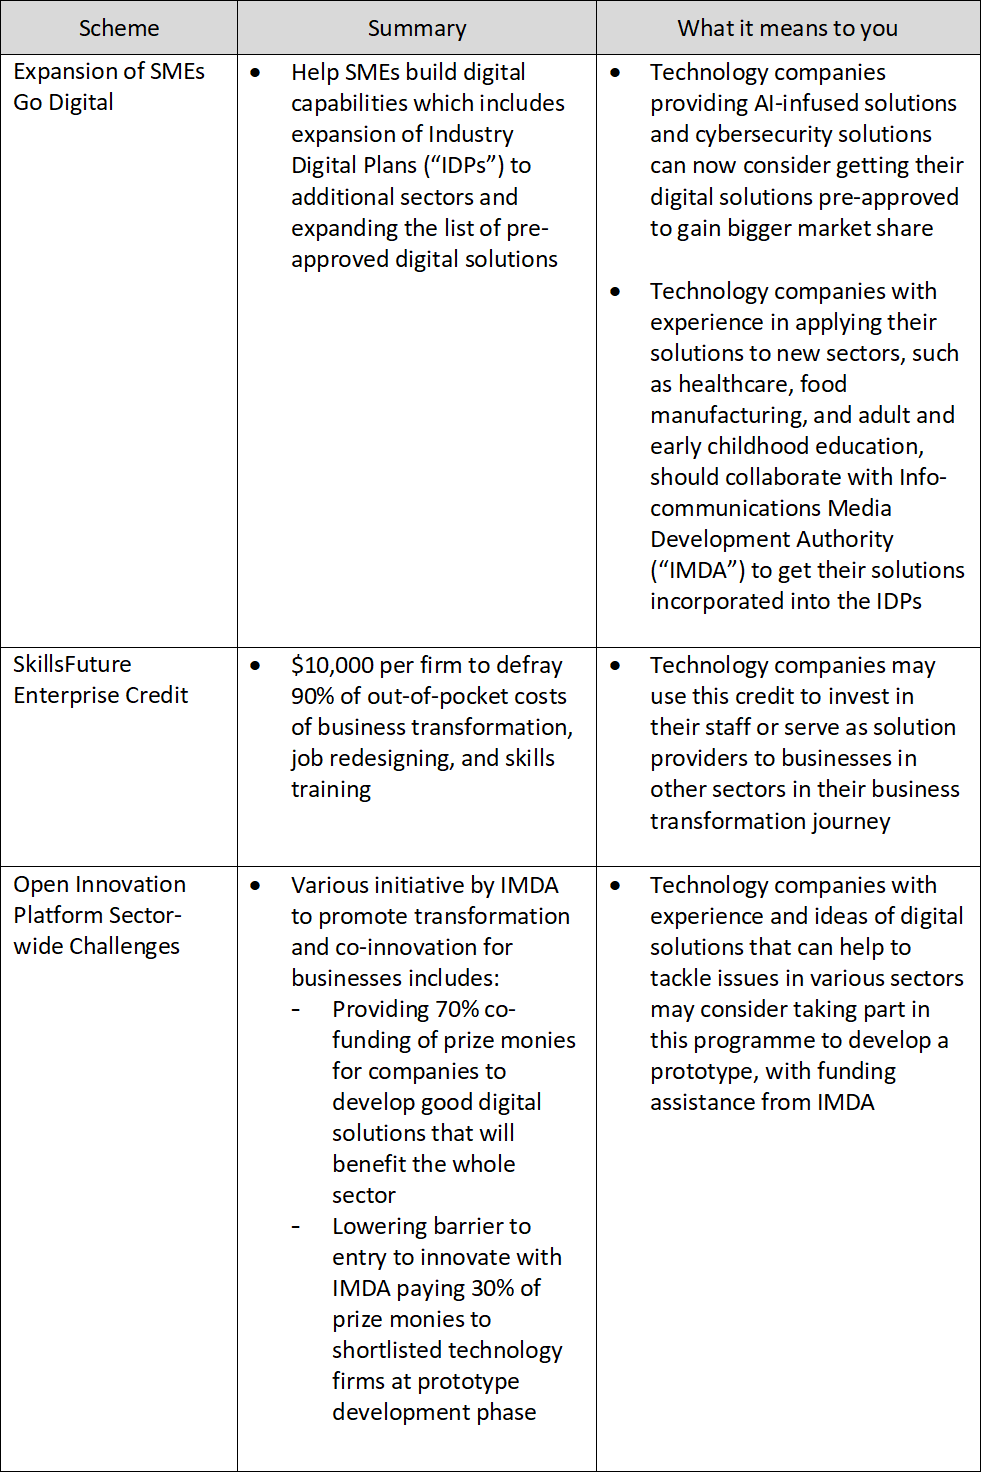 Table showing the scheme available for digital_planning